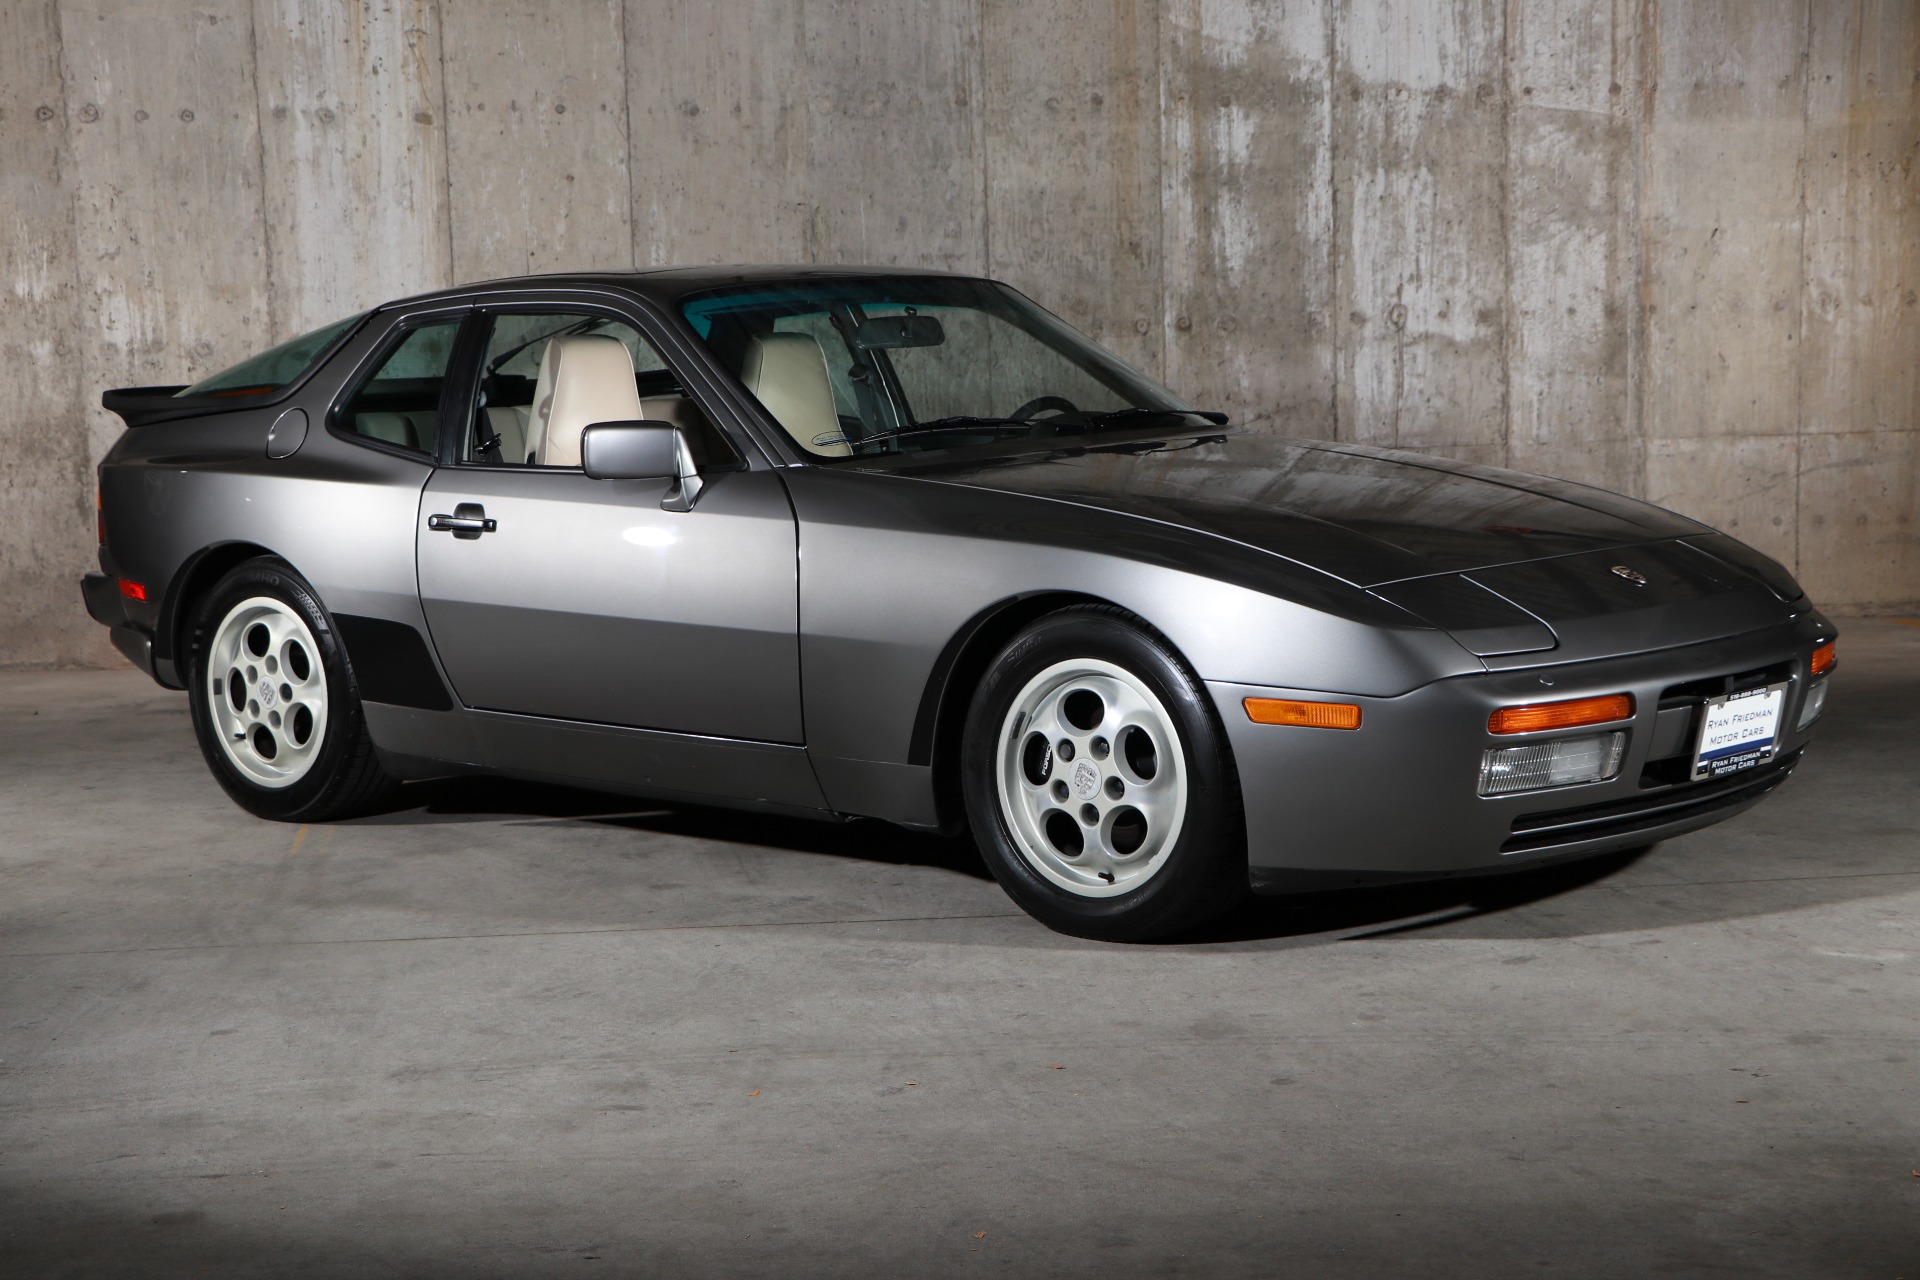 1987 PORSCHE 944 TURBO for sale by auction in Stockholm, Sweden